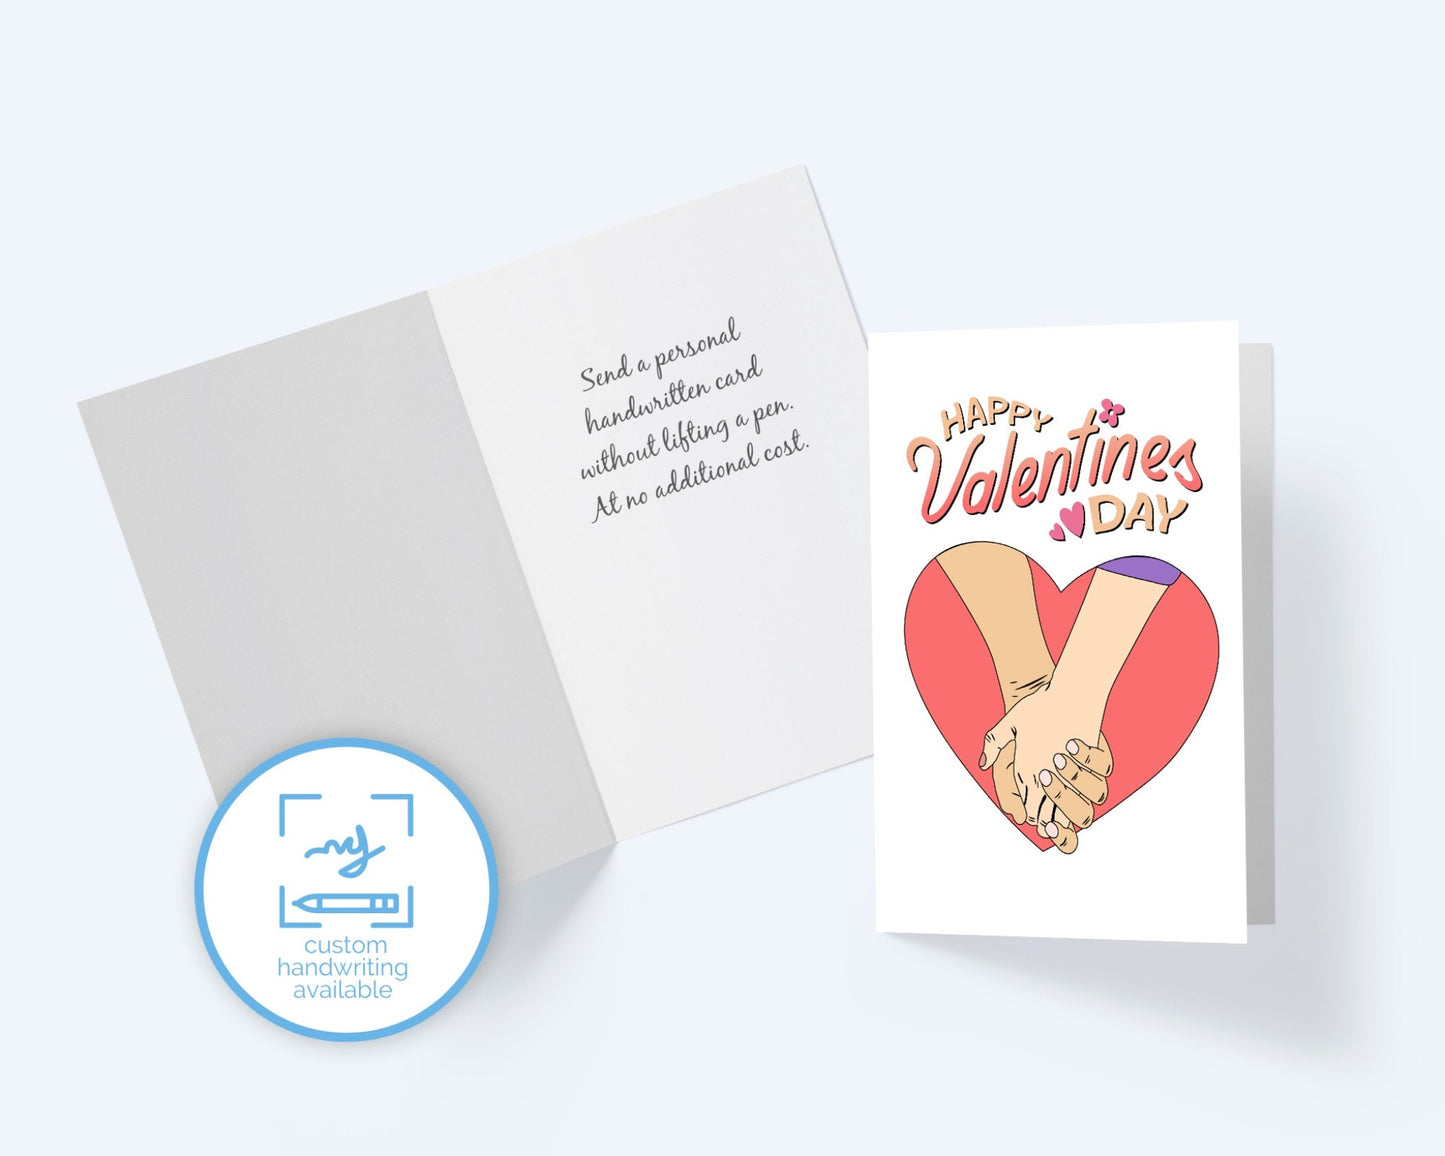 Happy Valentines Day, Hands in Heart Greeting Card